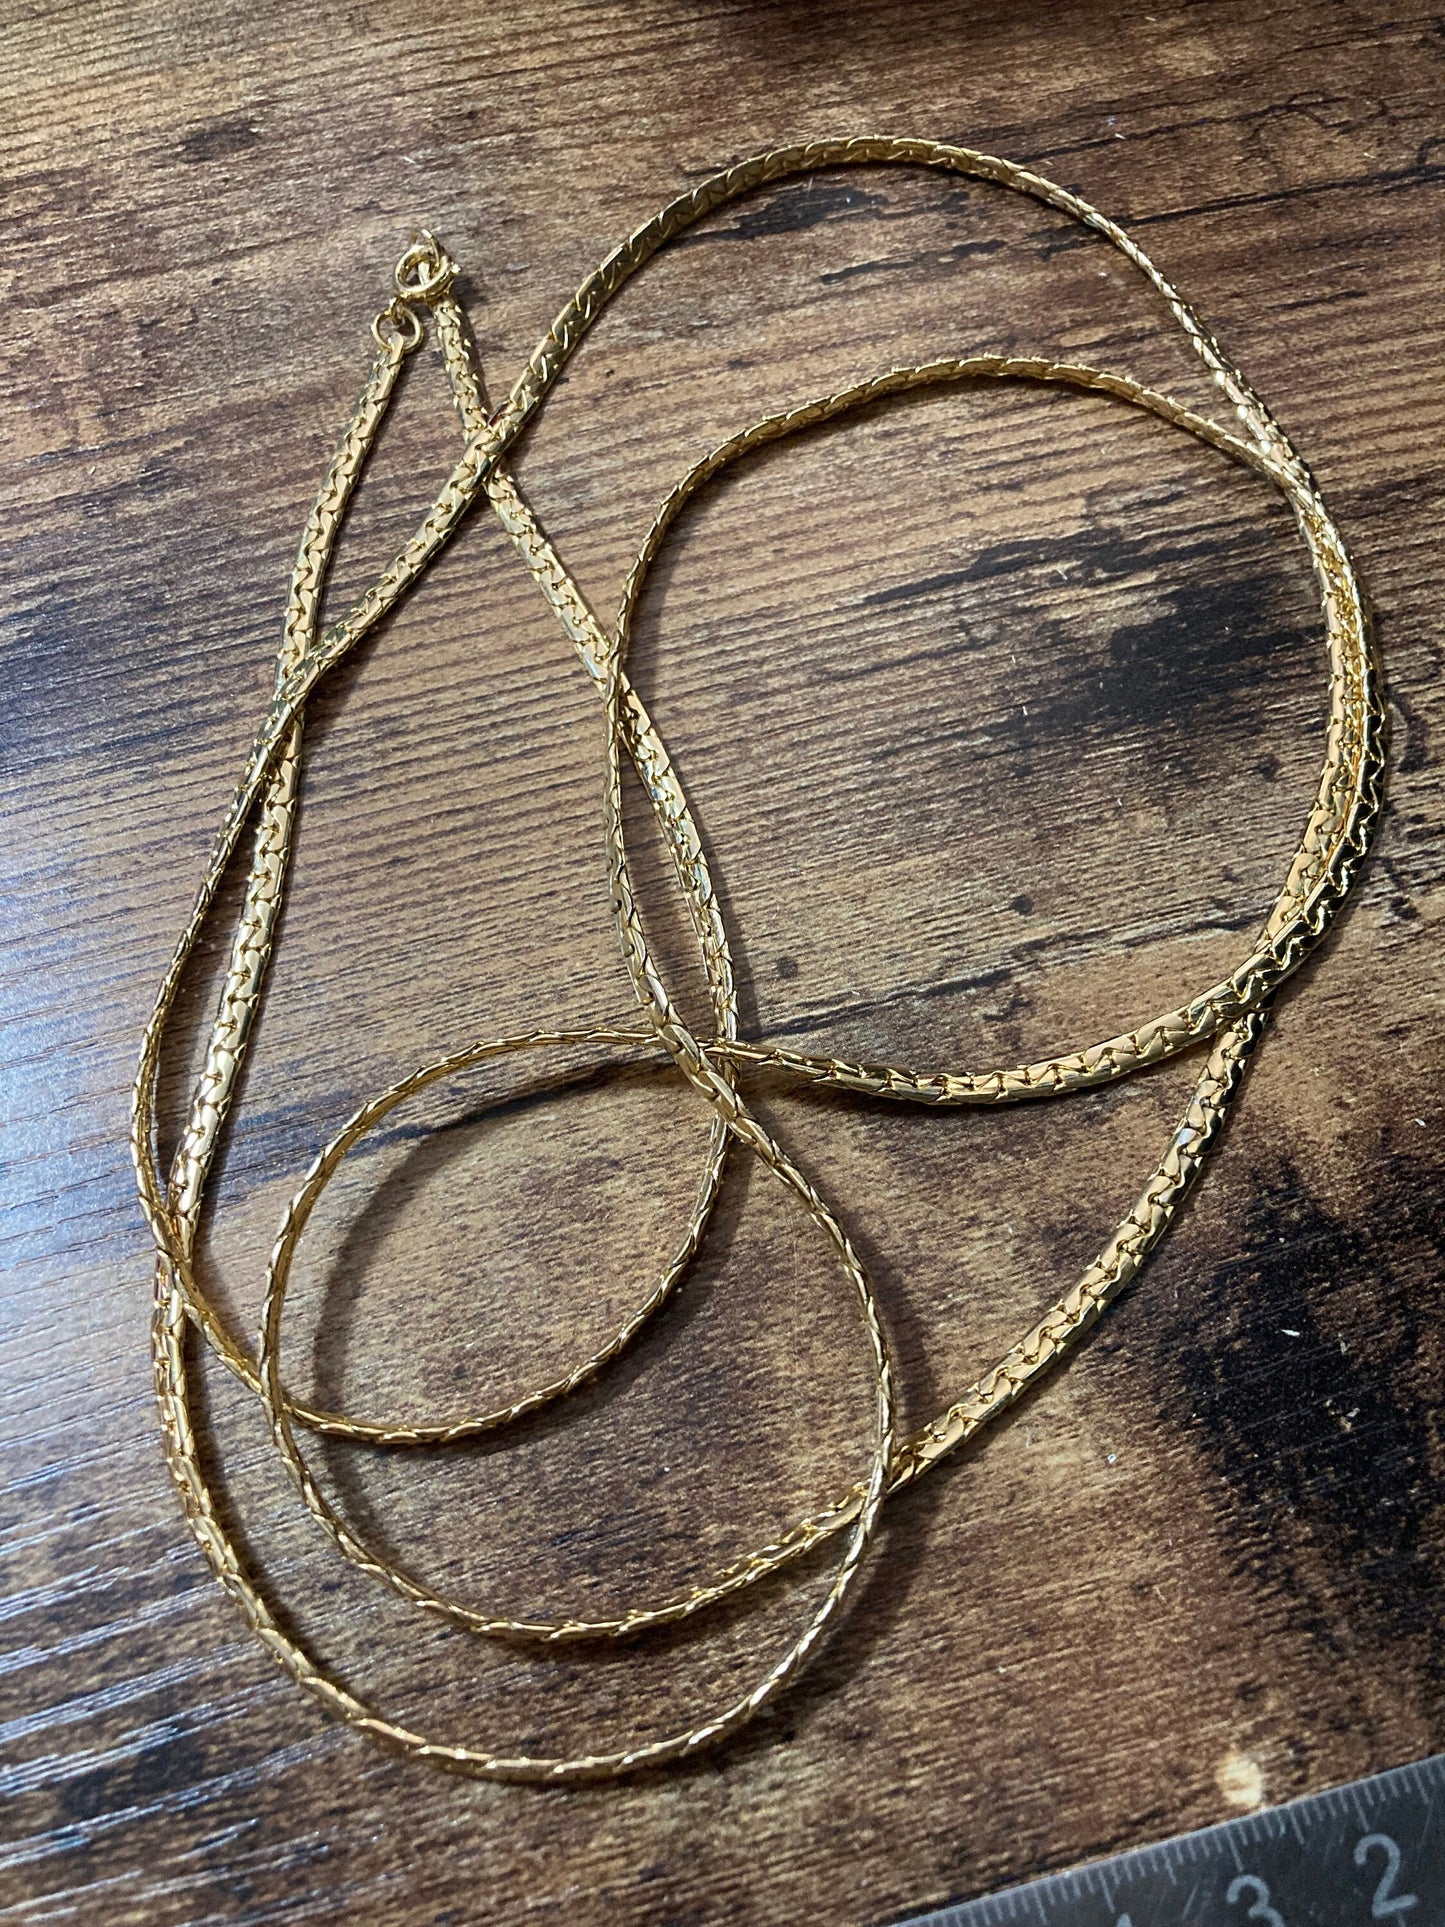 50” 127cm extra long 1980s thick gold plated flat woven chain necklace